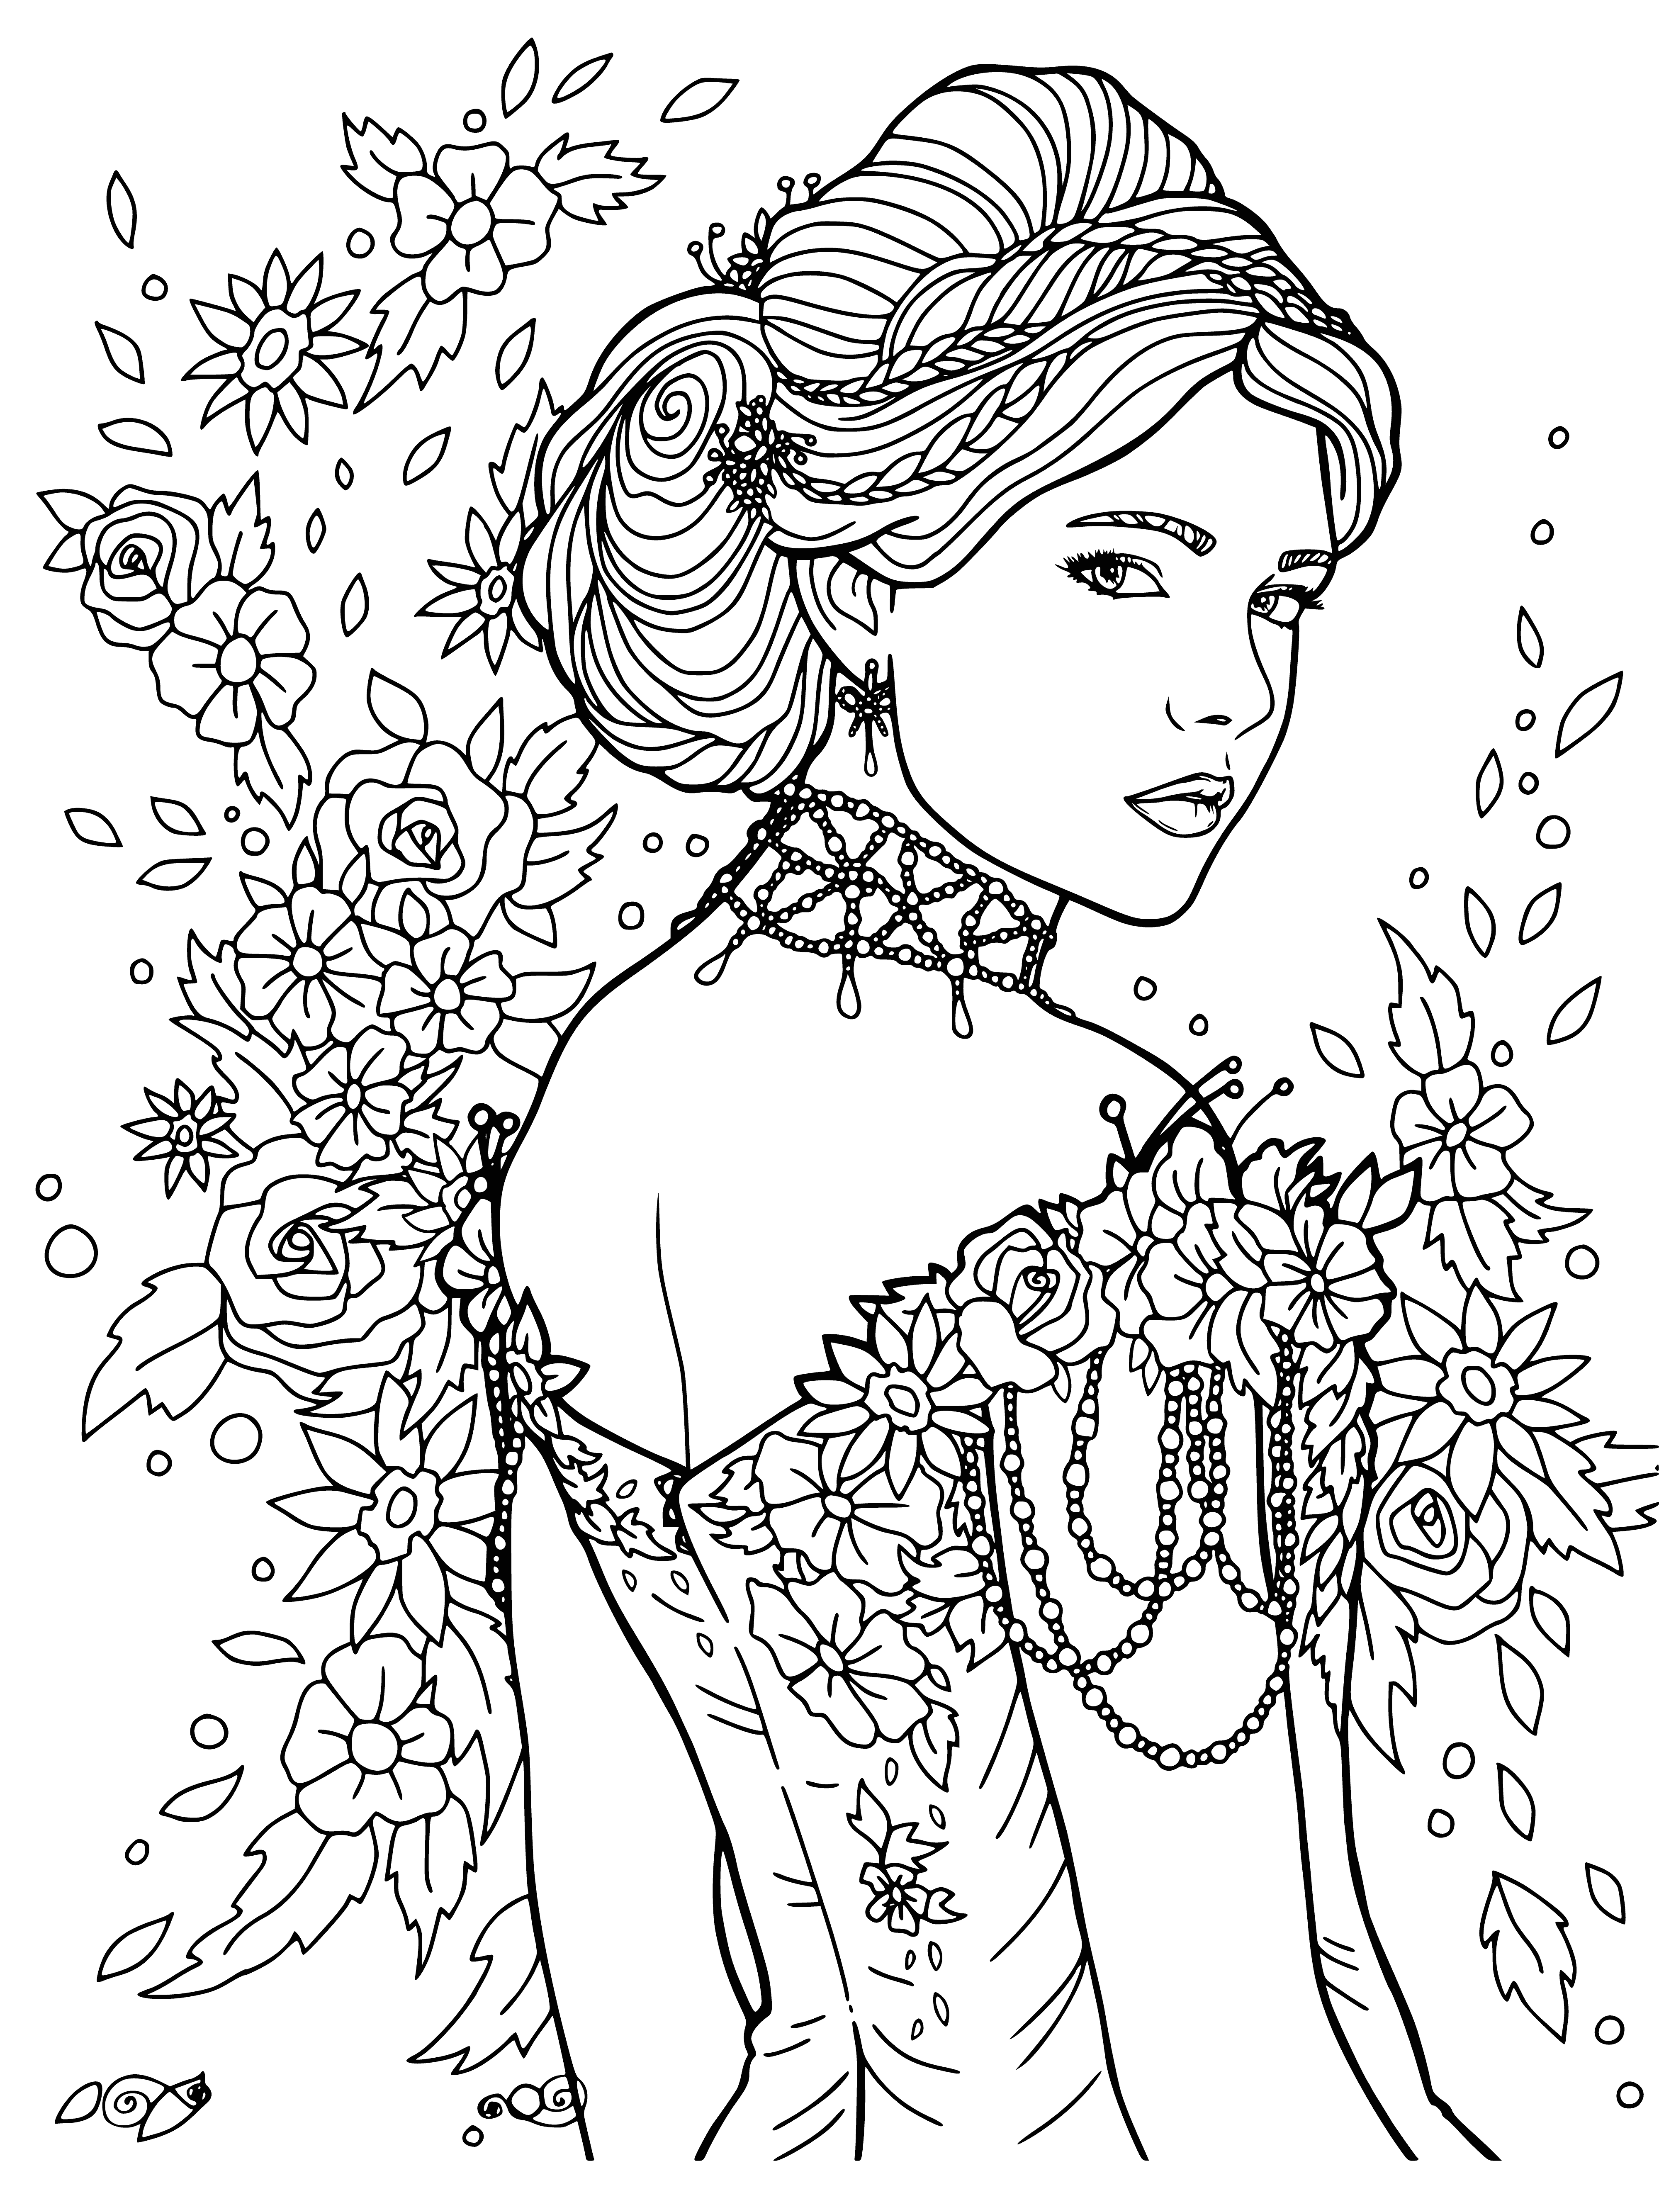 coloring page: Young woman enjoys quiet moment, creating beautiful, intricate patterns with her coloring book. She's filled pages with colorful designs and taken great care with her work.